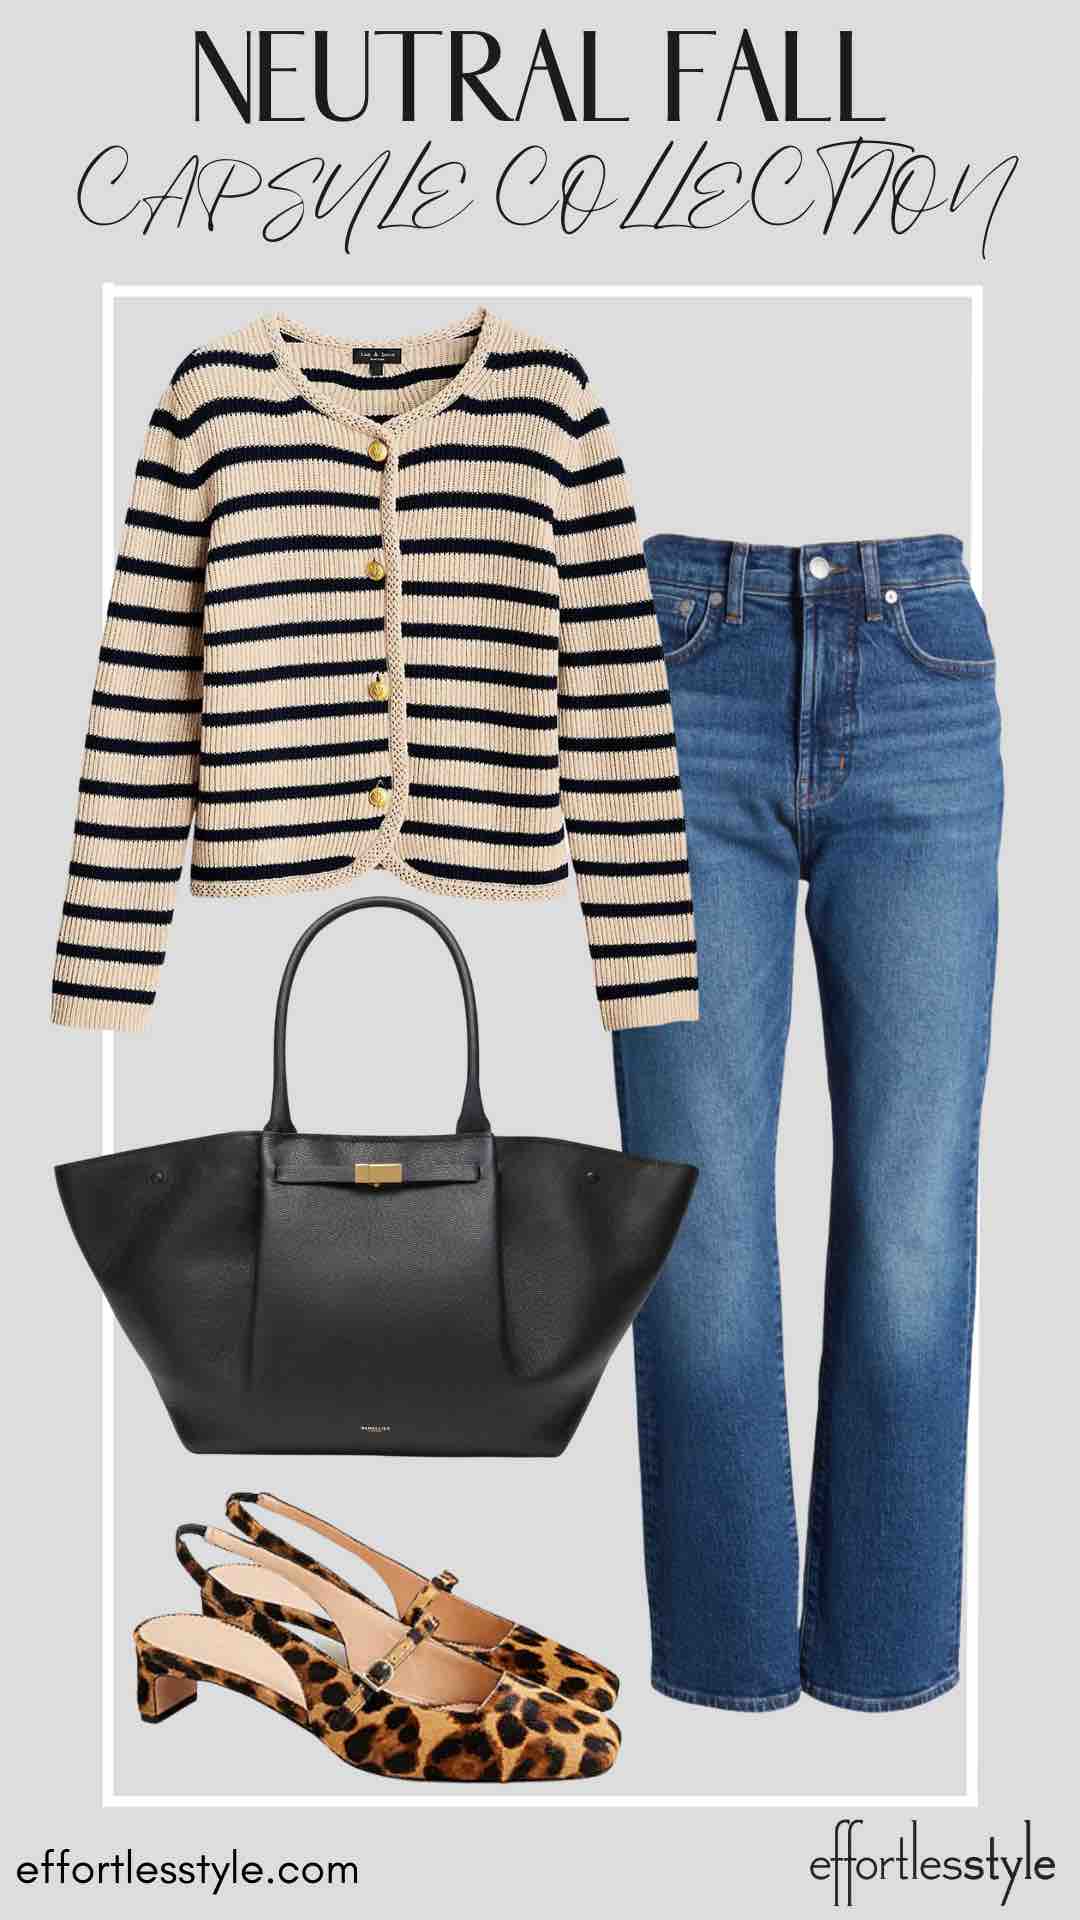 How To Wear Our Neutral Fall Capsule Wardrobe - Part 2 Striped Cardigan & Dark Wash Jeans how to mix pattern how to wear animal print with stripes staying animal print shoes this fall how to wear stripes this fall elevated casual fall looks how to create a capsule wardrobe how to style your neutral fall pieces nashville stylists share the best pieces for fall must have pieces for fall how to wear jeans to work how to wear dark jeans this fall how to wear jeans to the office how to dress up your jeans